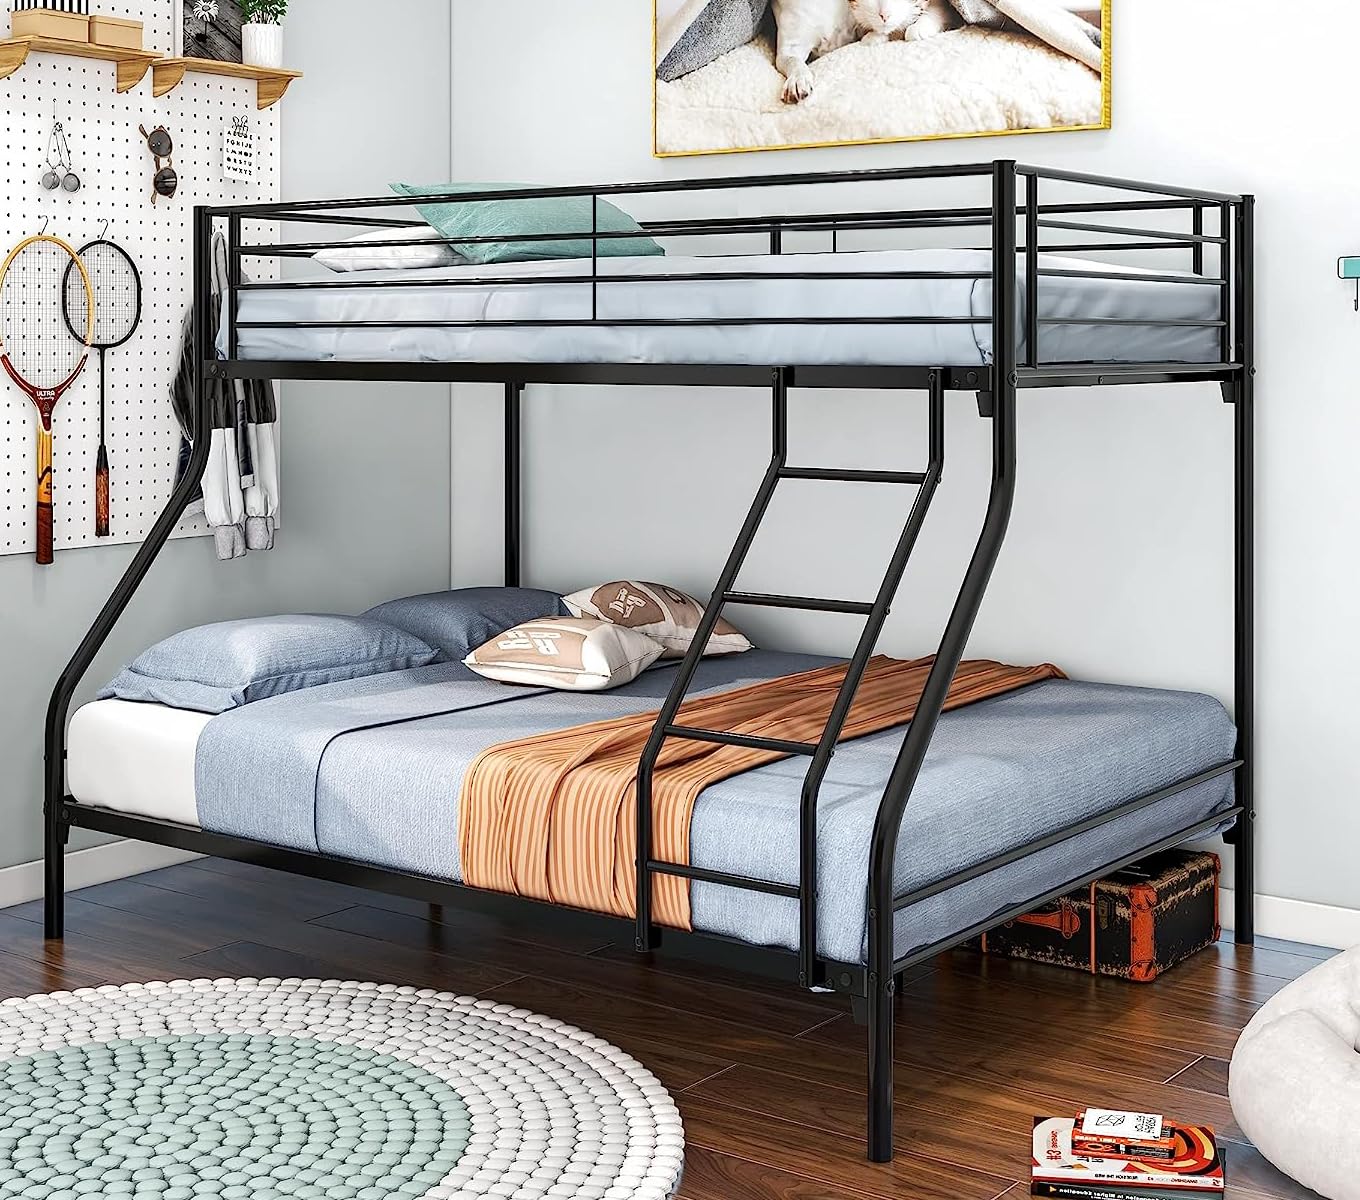 EMKK Twin Over Full Metal Bunk Bed Heavy Duty Bunk Beds Frame with Side Ladders Convertible Bunkbed with Safety Guard Rails, Metal Bunk Bed Frame, Only $199.99